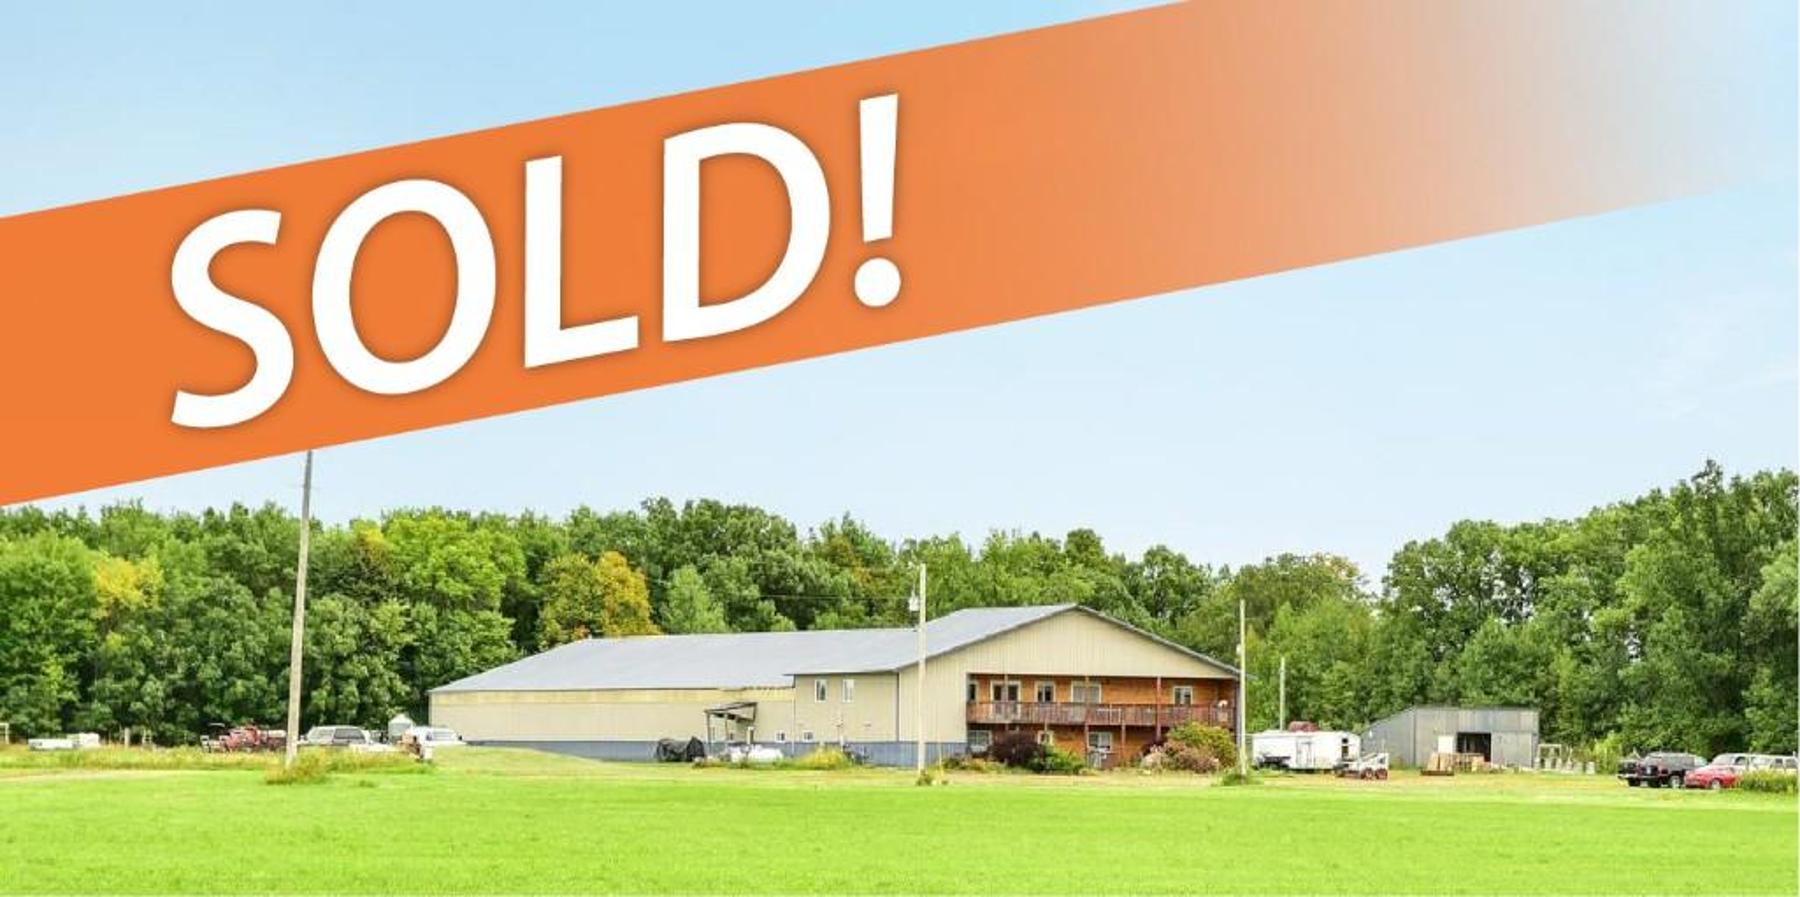 Another Property Sold! Bid-2-Buy (Curt Werner and Landon Werner) collaborating with Realty Group (Jeff Werner)